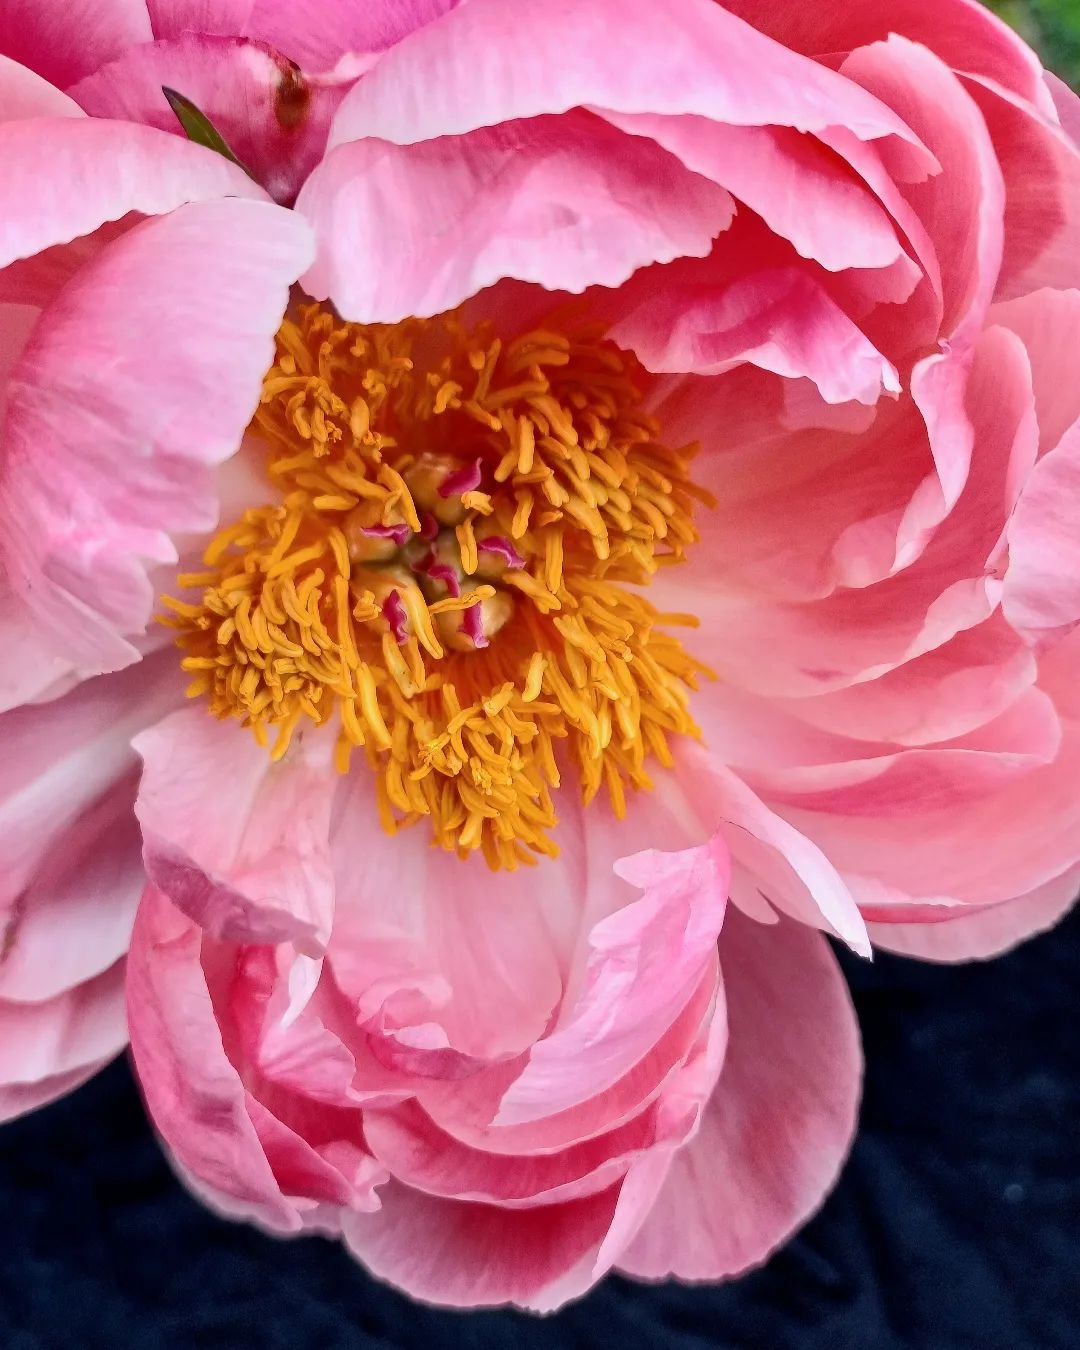 Now, the Coral Charm peony is blooming.

Don't you love these amazing petals?

#peoniesofinstagram #peonyseason #mayflowers #springflowers🌷#springgrowth #petals
#flowermagic #flowerpetals #homegarden
#flowergardener #thehappygardeninglife